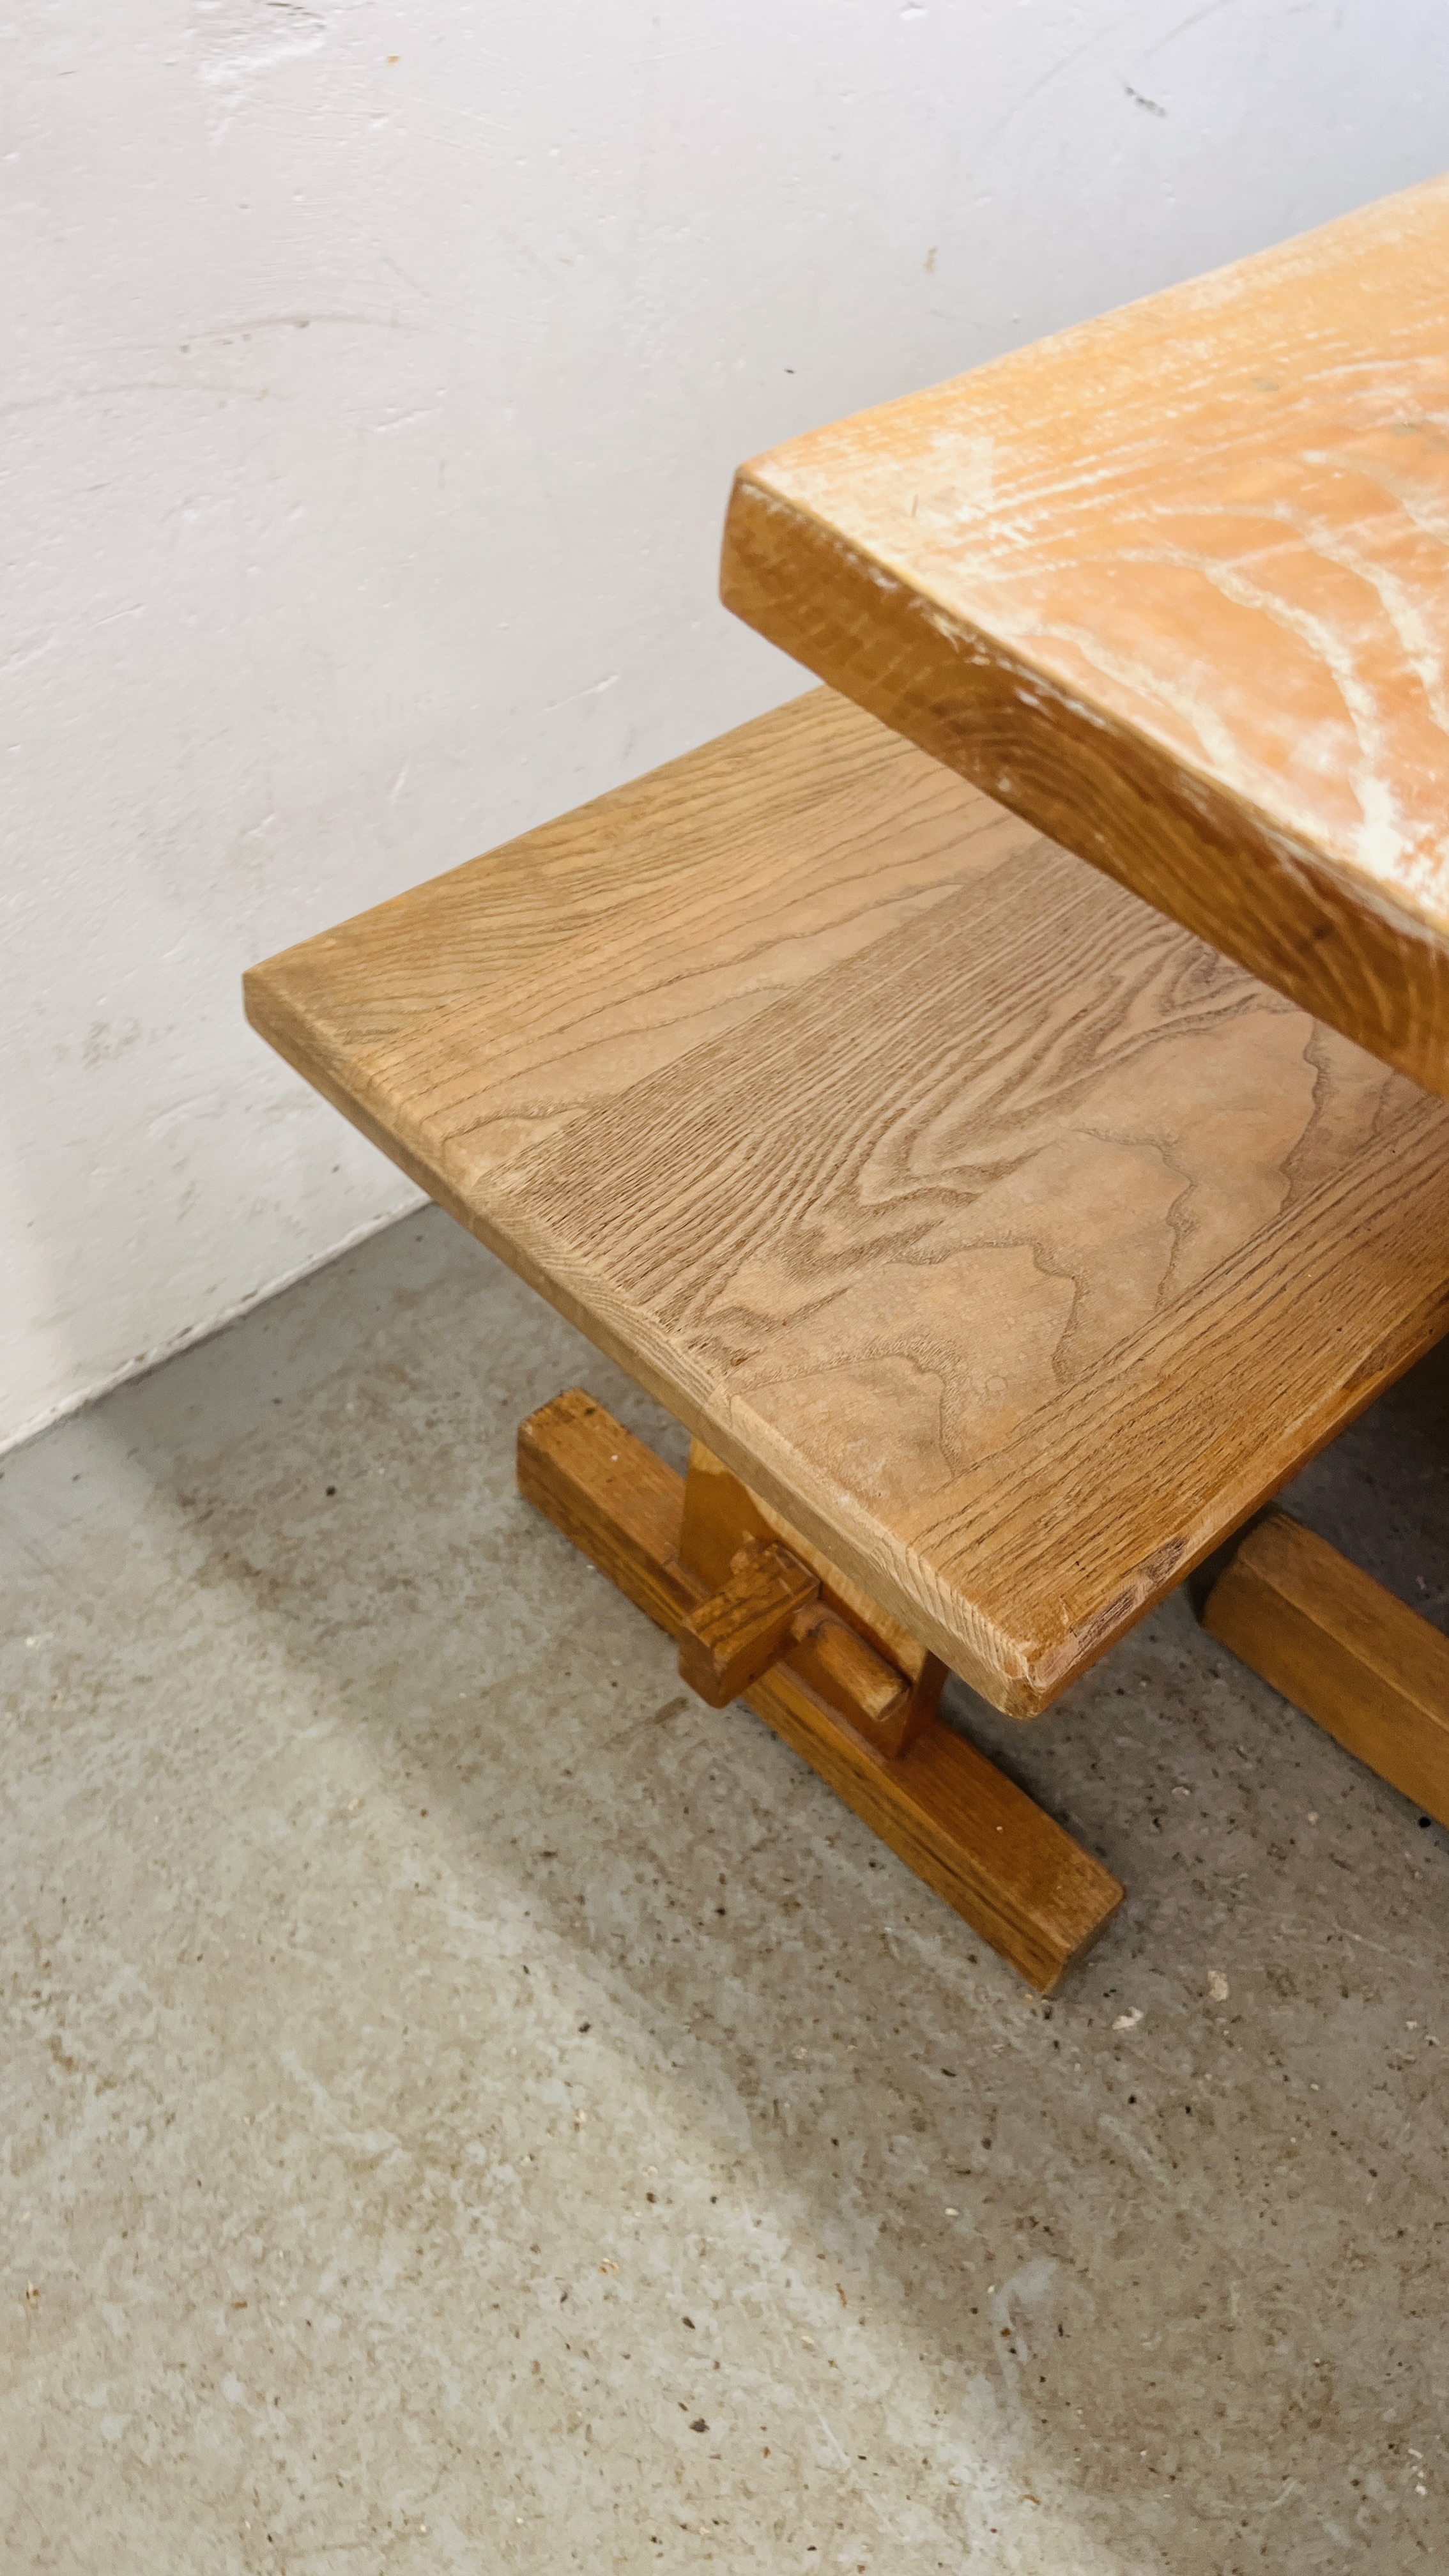 A HEAVY OAK KITCHEN TABLE L 168CM X W 79CM X H 73CM ALONG WITH A PAIR OF OAK BENCHES L 167 X W 35 X - Image 9 of 11